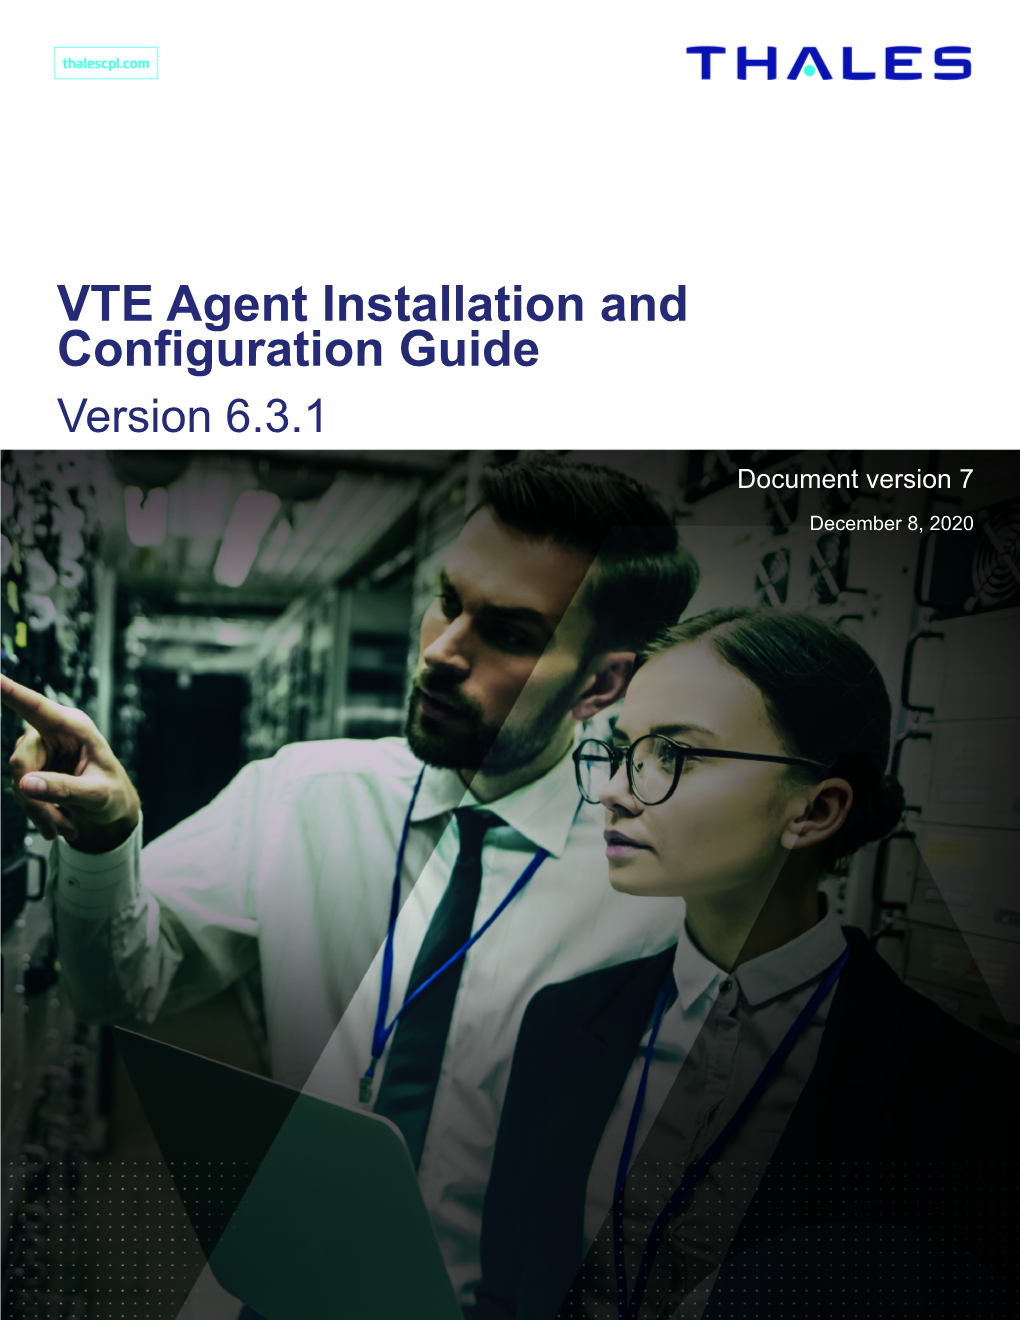 VTE Agent Installation and Configuration Guide Version 6.3.1 Document Version 7